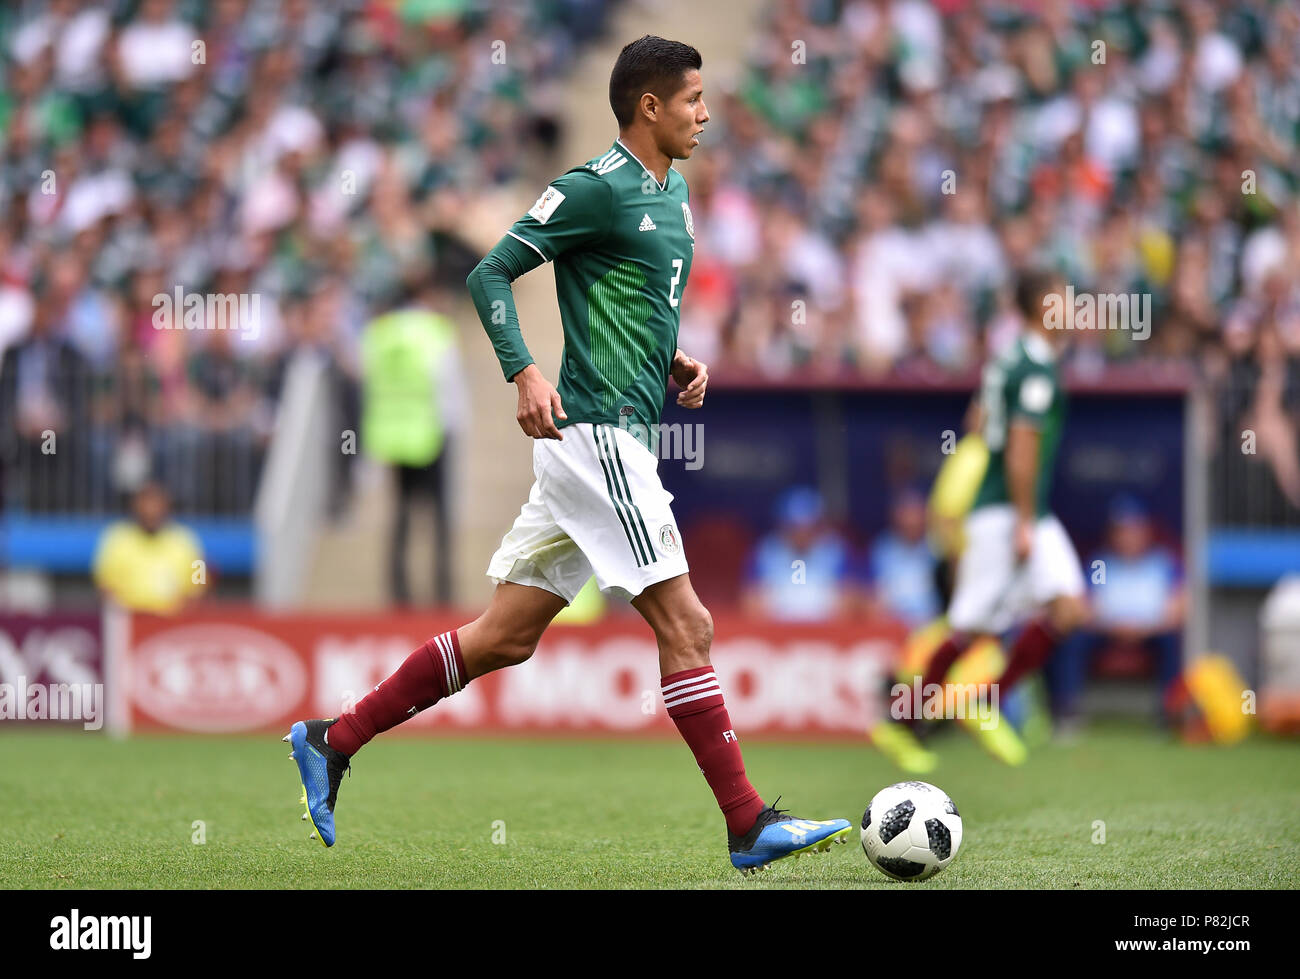 MOSCOW, RUSSIA - JUNE 17: Hugo Ayala of Mexico in action during the 2018 FIFA World Cup Russia group F match between Germany and Mexico at Luzhniki Stadium on June 17, 2018 in Moscow, Russia. (Photo by Lukasz Laskowski/PressFocus/MB Media) Stock Photo